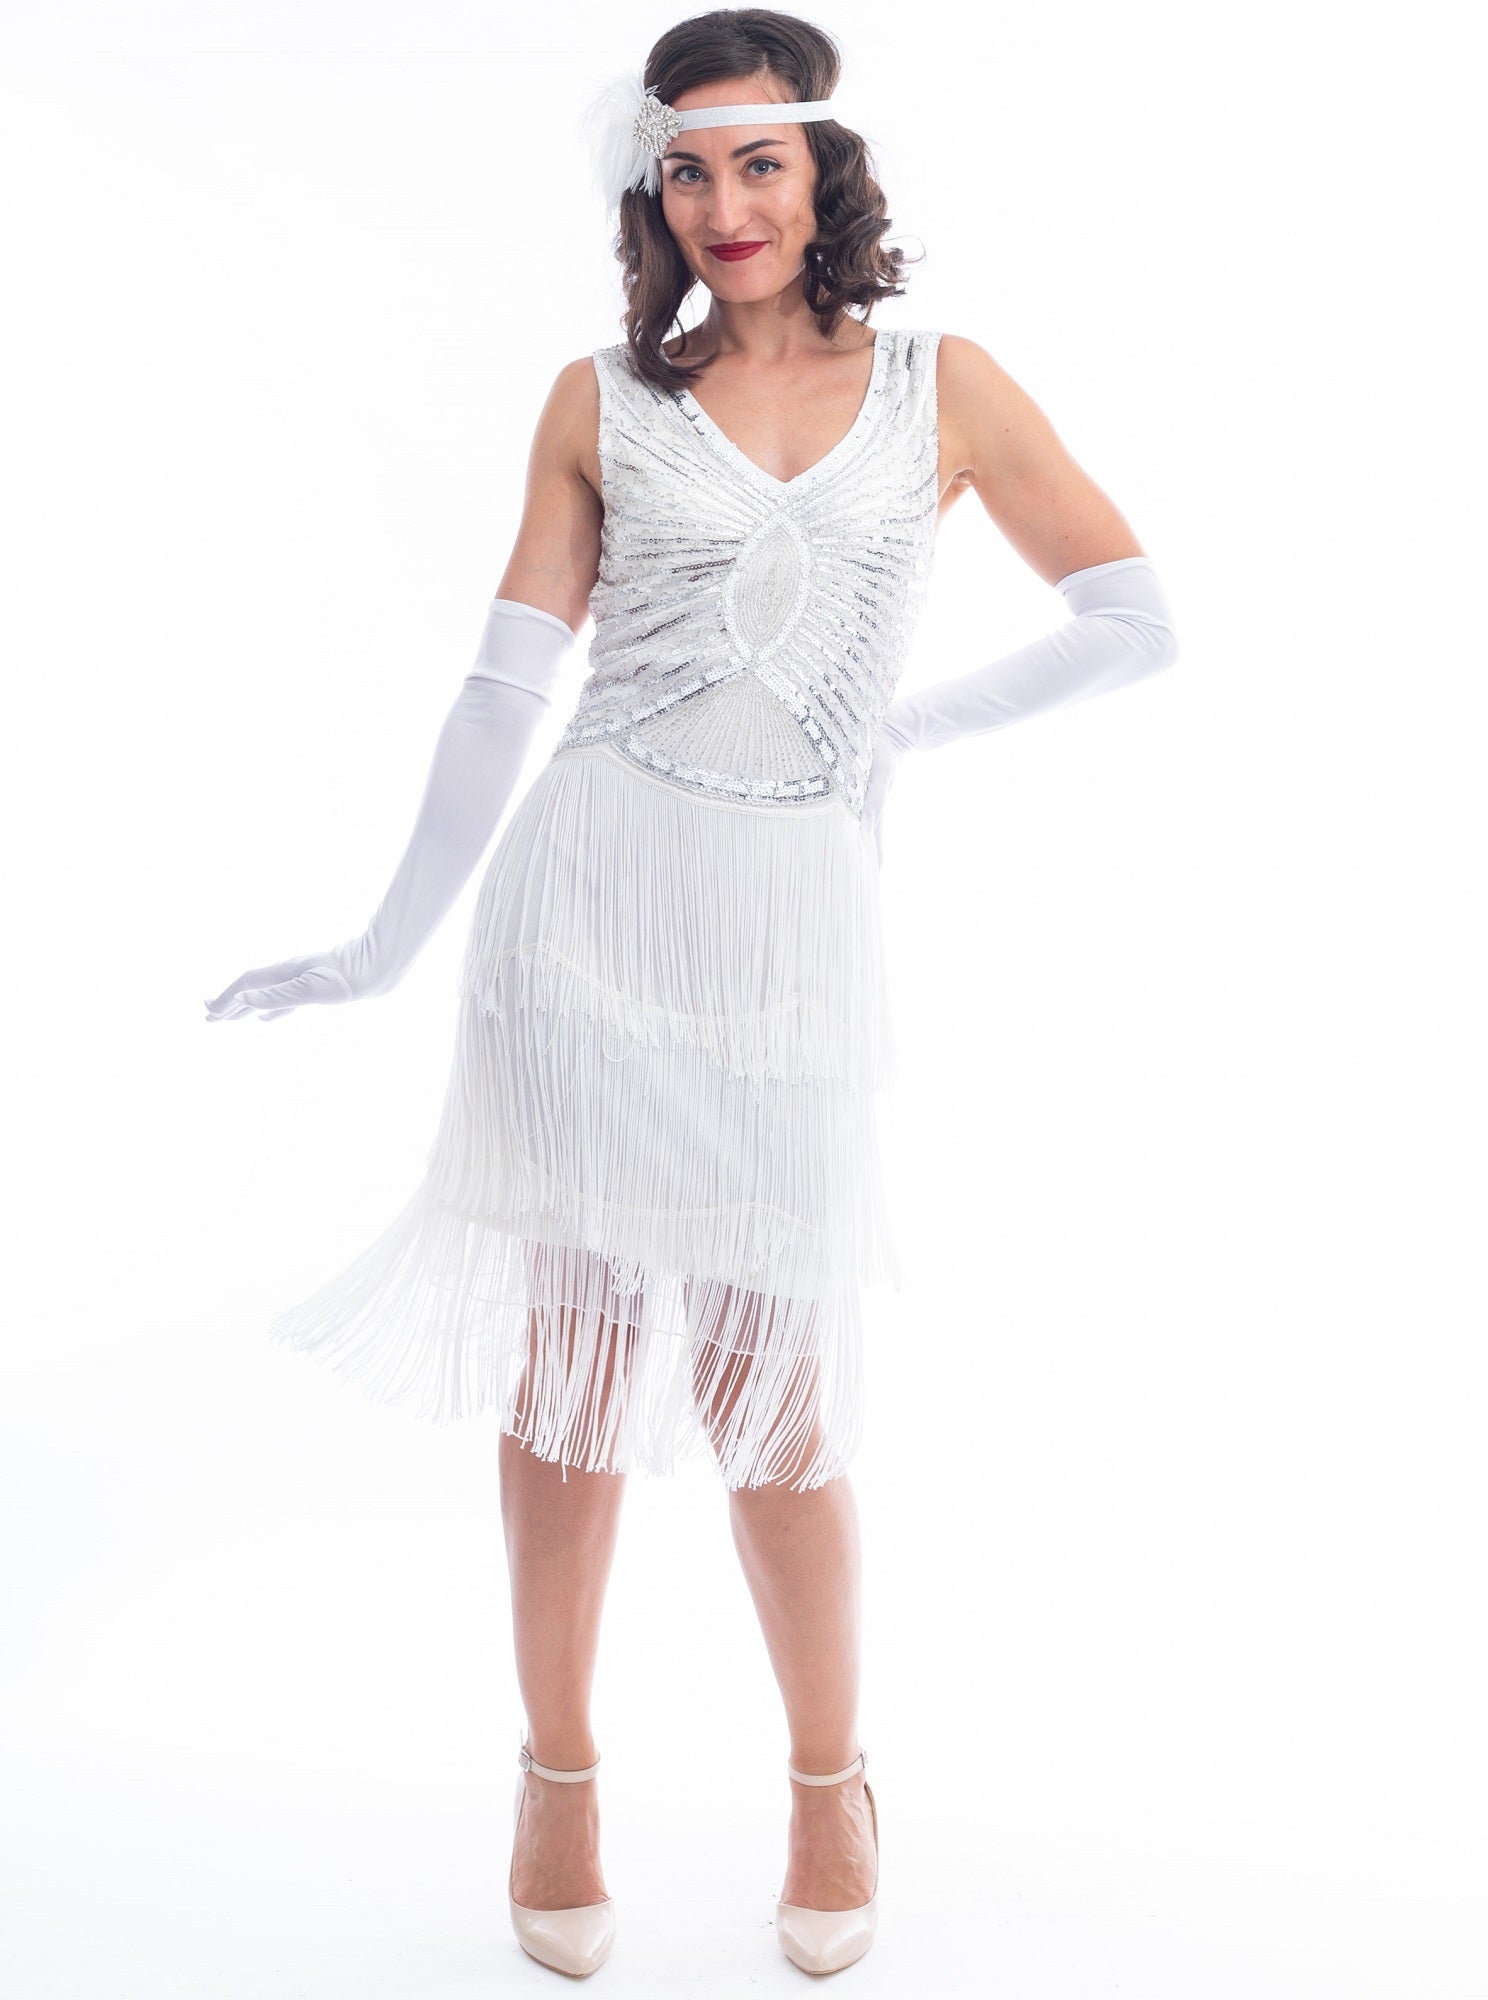 A vintage white gatsby dress with white beads, sequins and fringes around hem.